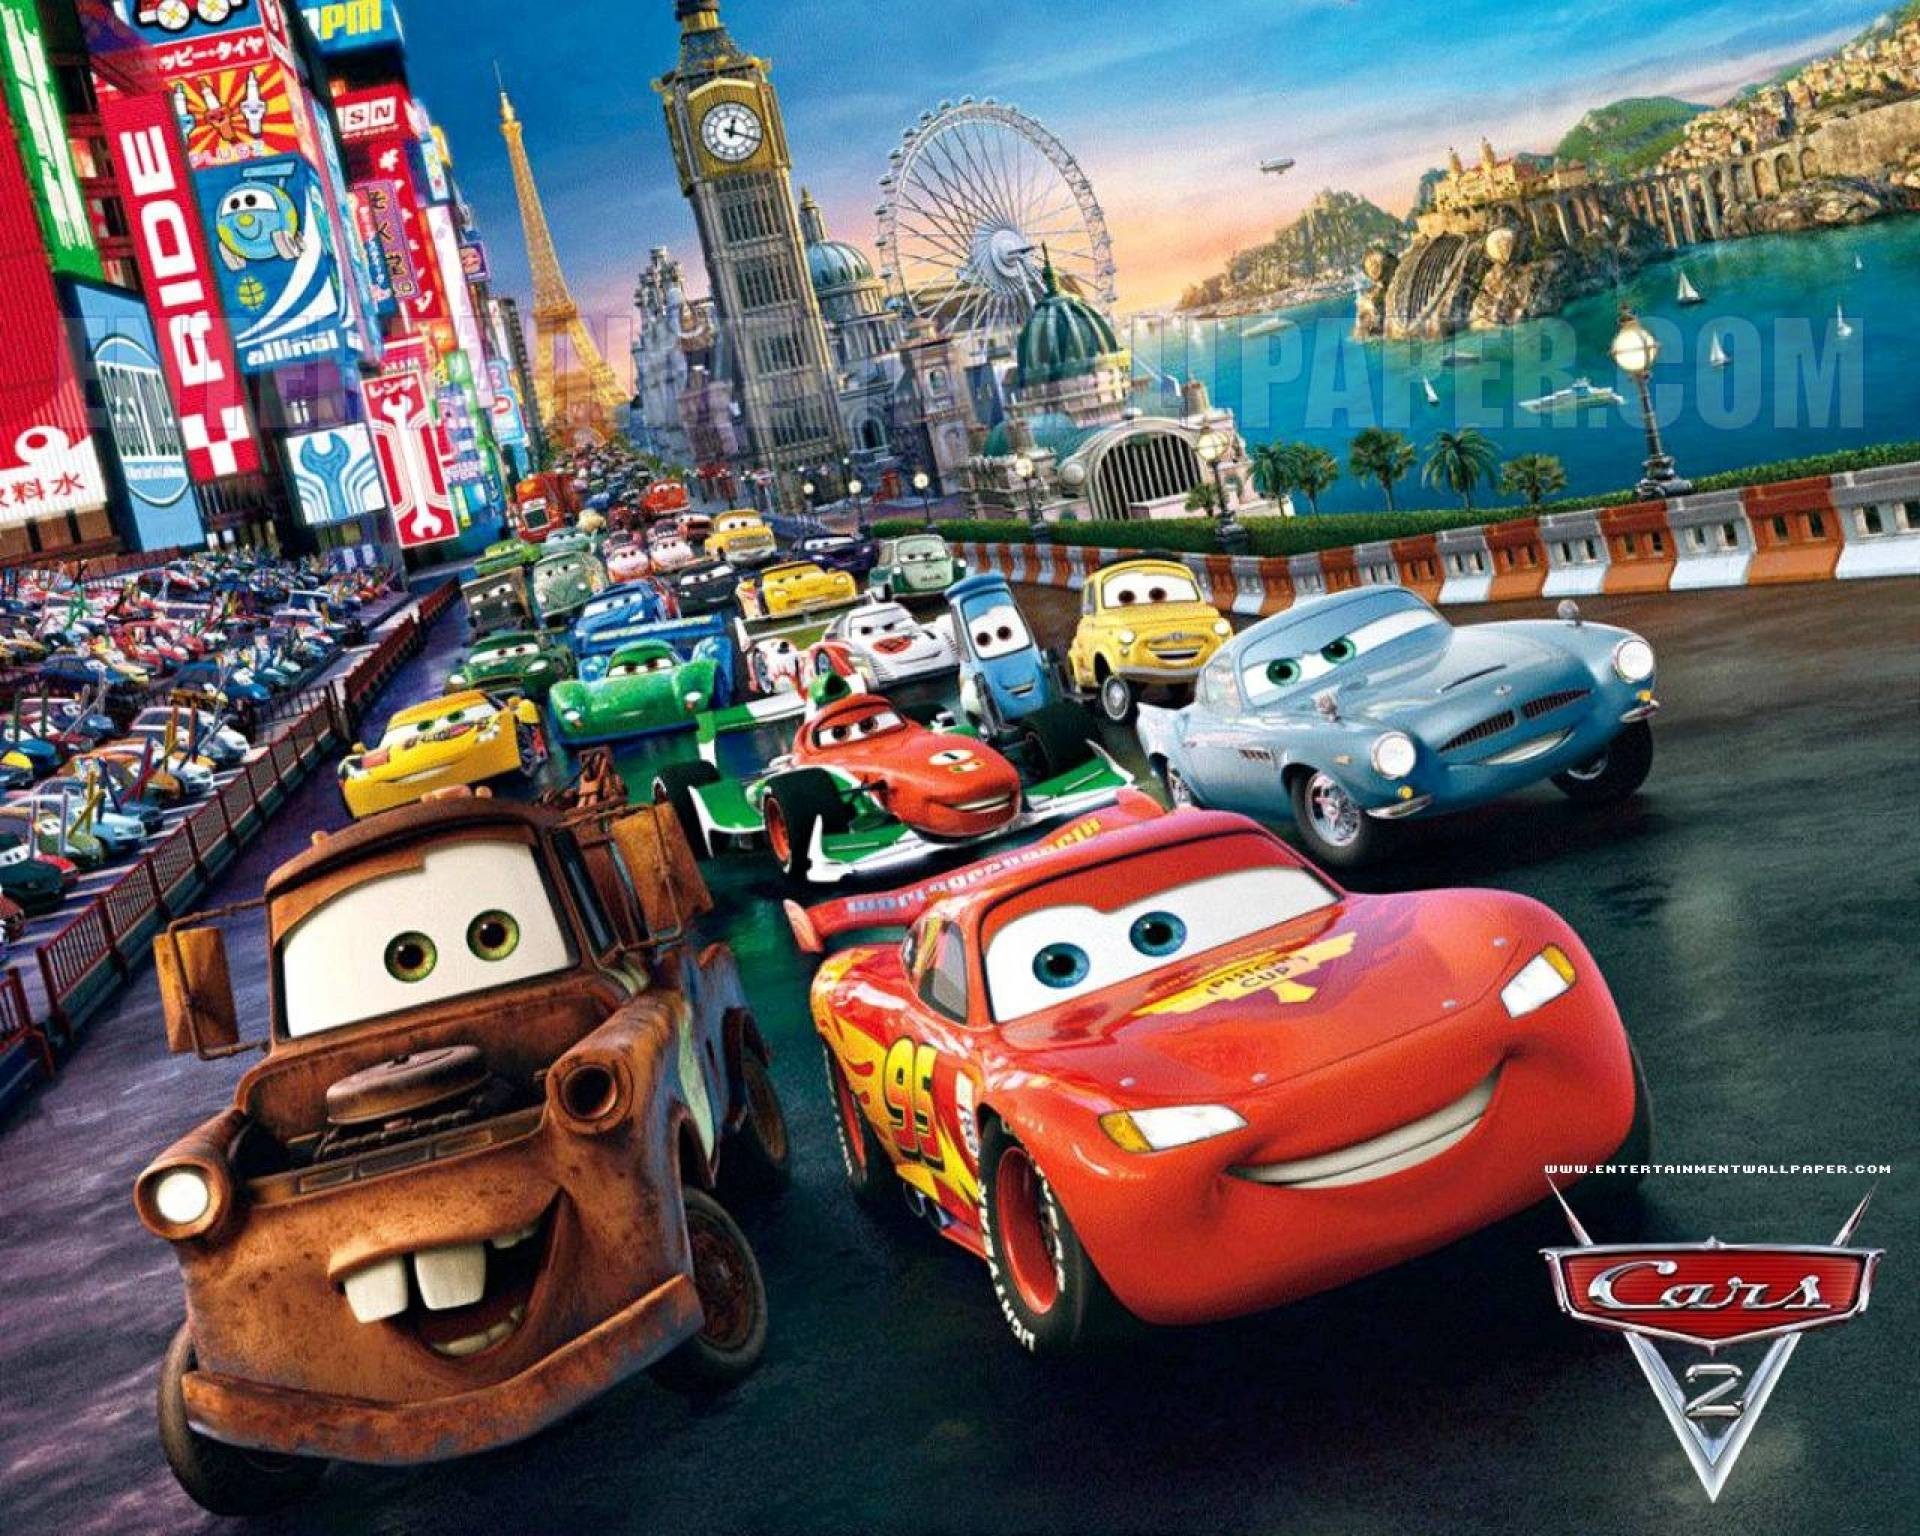 1920x1536 Search Results for “cars movie wallpaper desktop” – Adorable Wallpapers